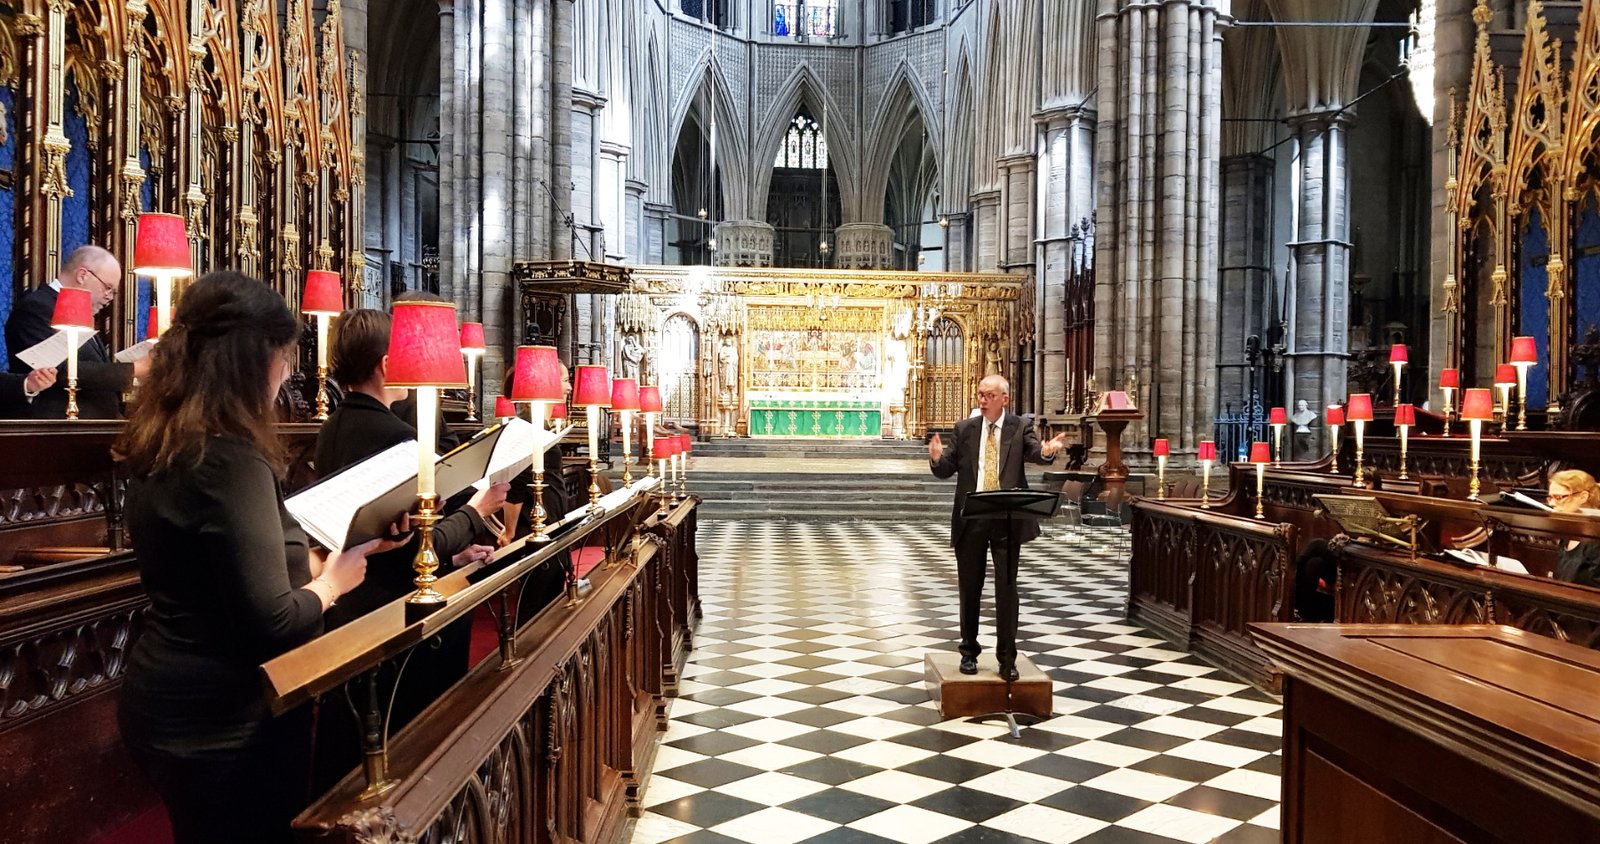 Nicholas Houghton conducting the Lewes Singers at Westminster Abbey